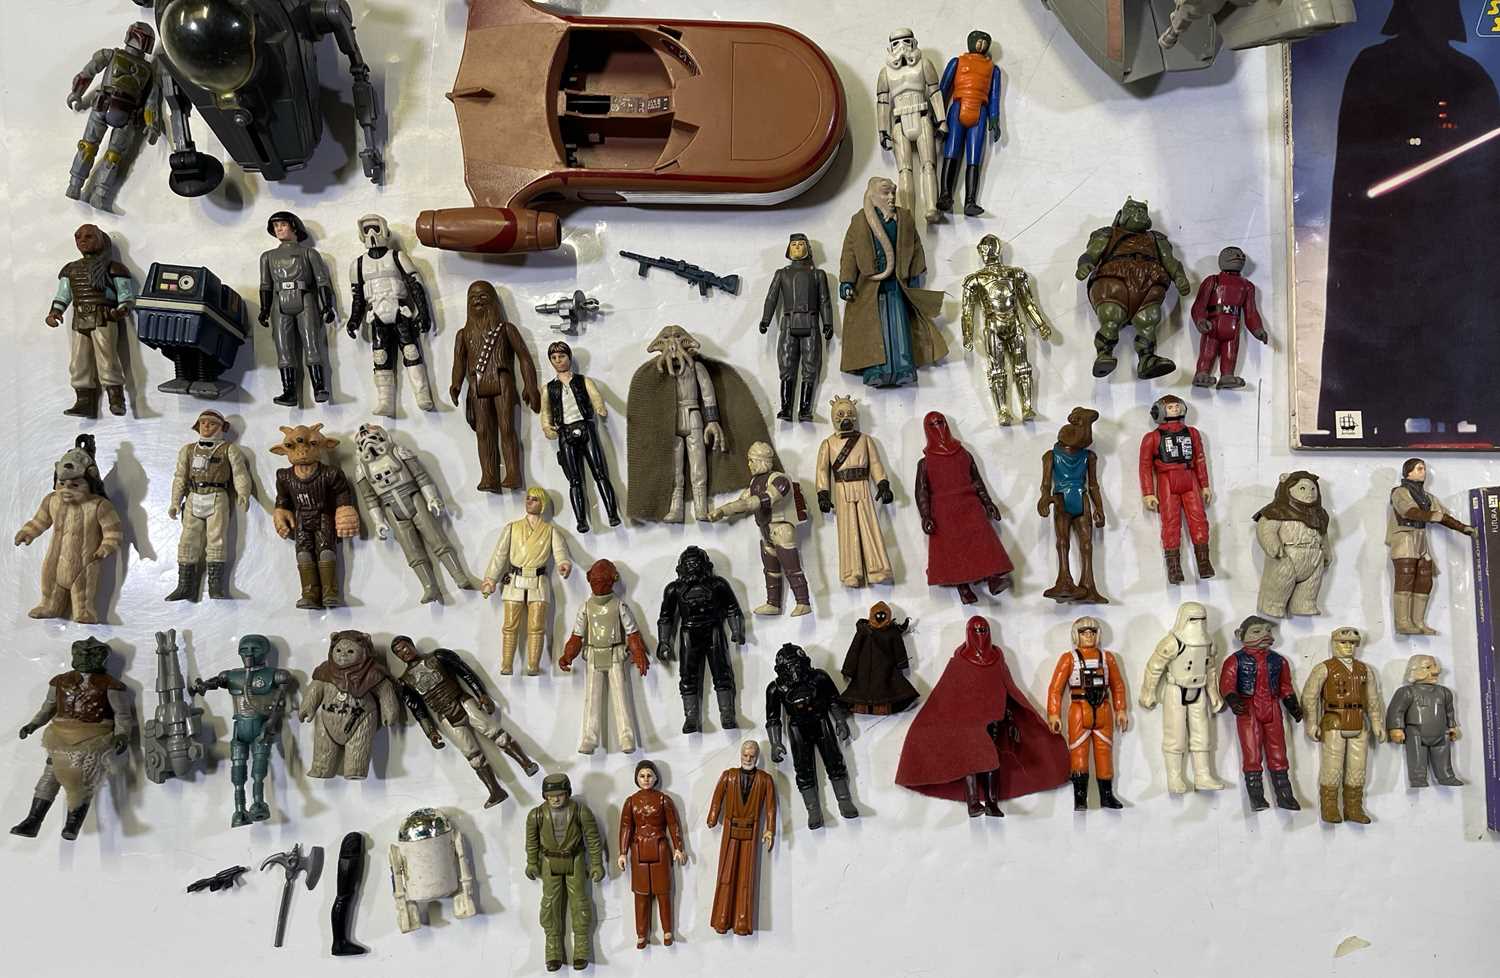 STAR WARS - LARGE COLLECTION OF ORIGINAL KENNER FIGURINES. - Image 2 of 5